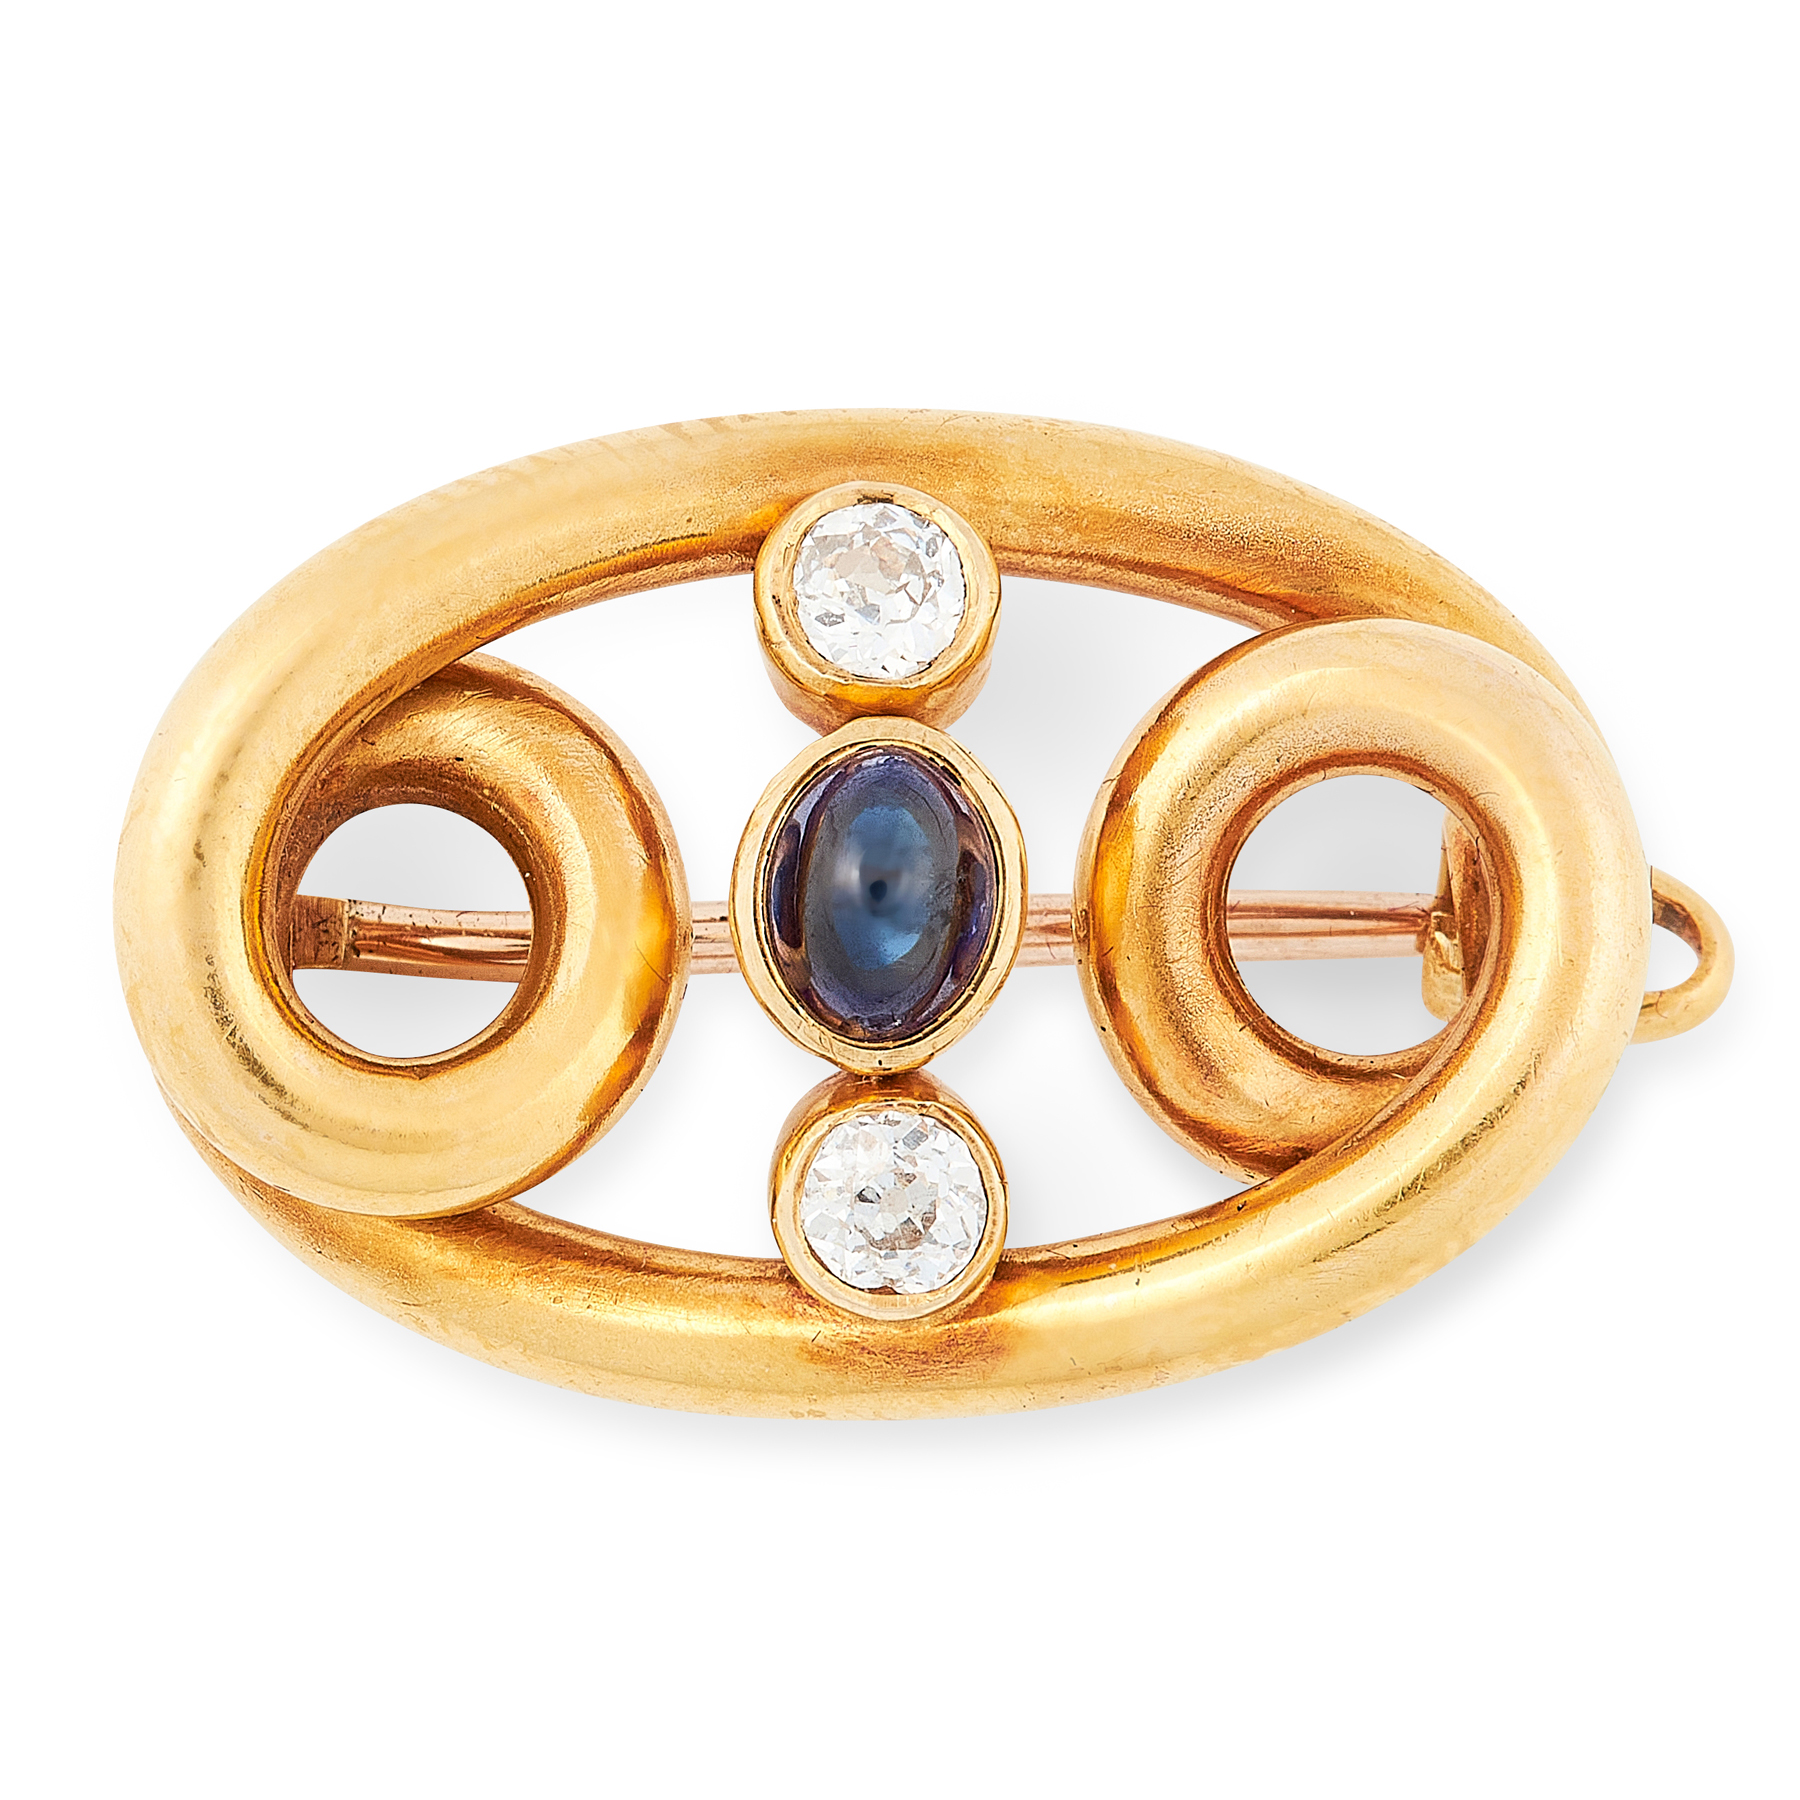 AN ANTIQUE SAPPHIRE AND DIAMOND BROOCH in yellow gold, the scrolling body set with an oval cut